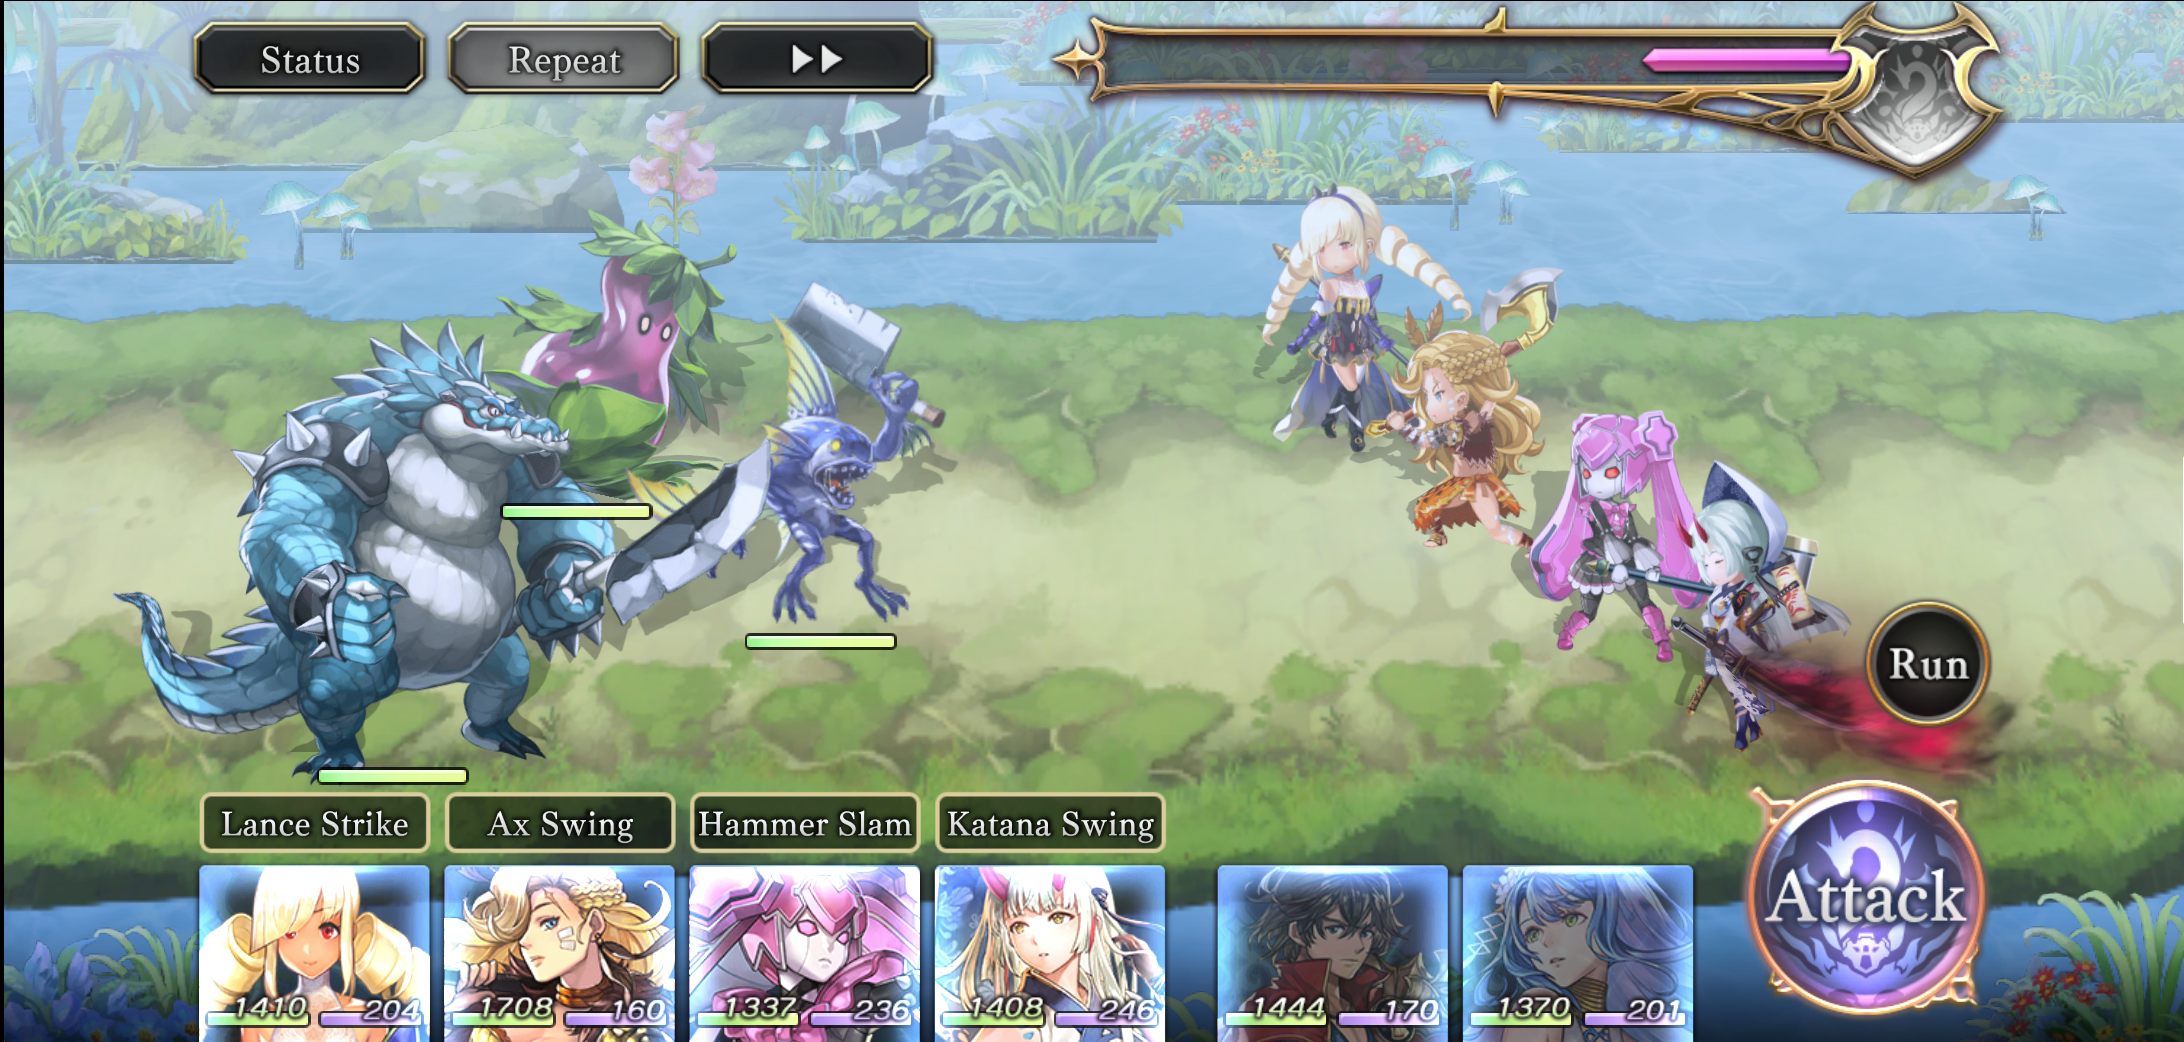 A screenshot of a battle, showing your party members and the enemies.